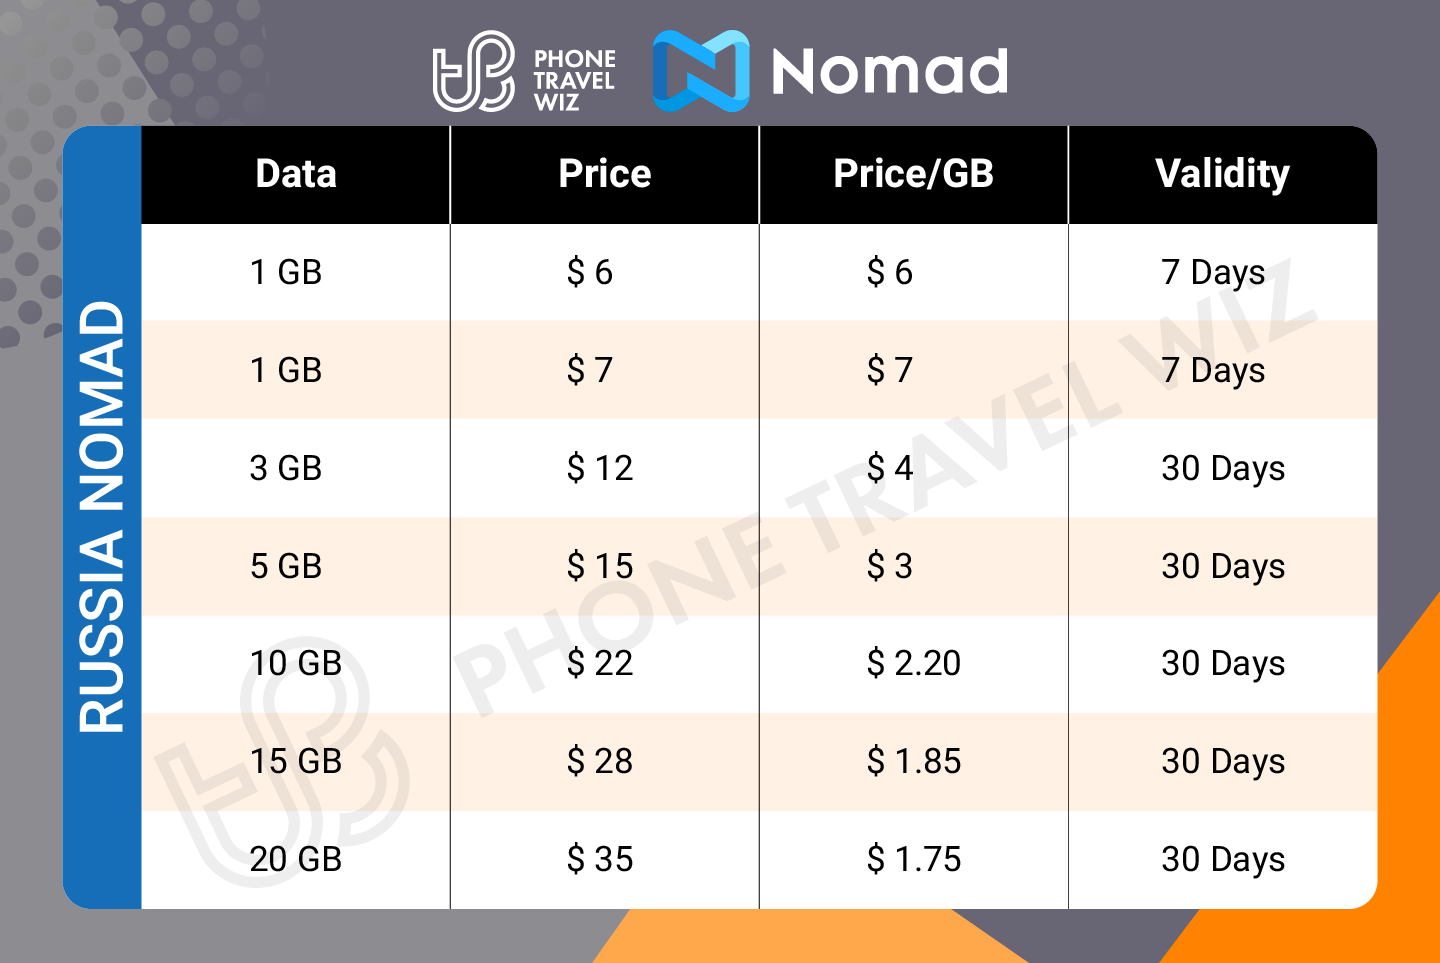 Nomad Russia eSIM Price & Data Details Infographic by Phone Travel Wiz